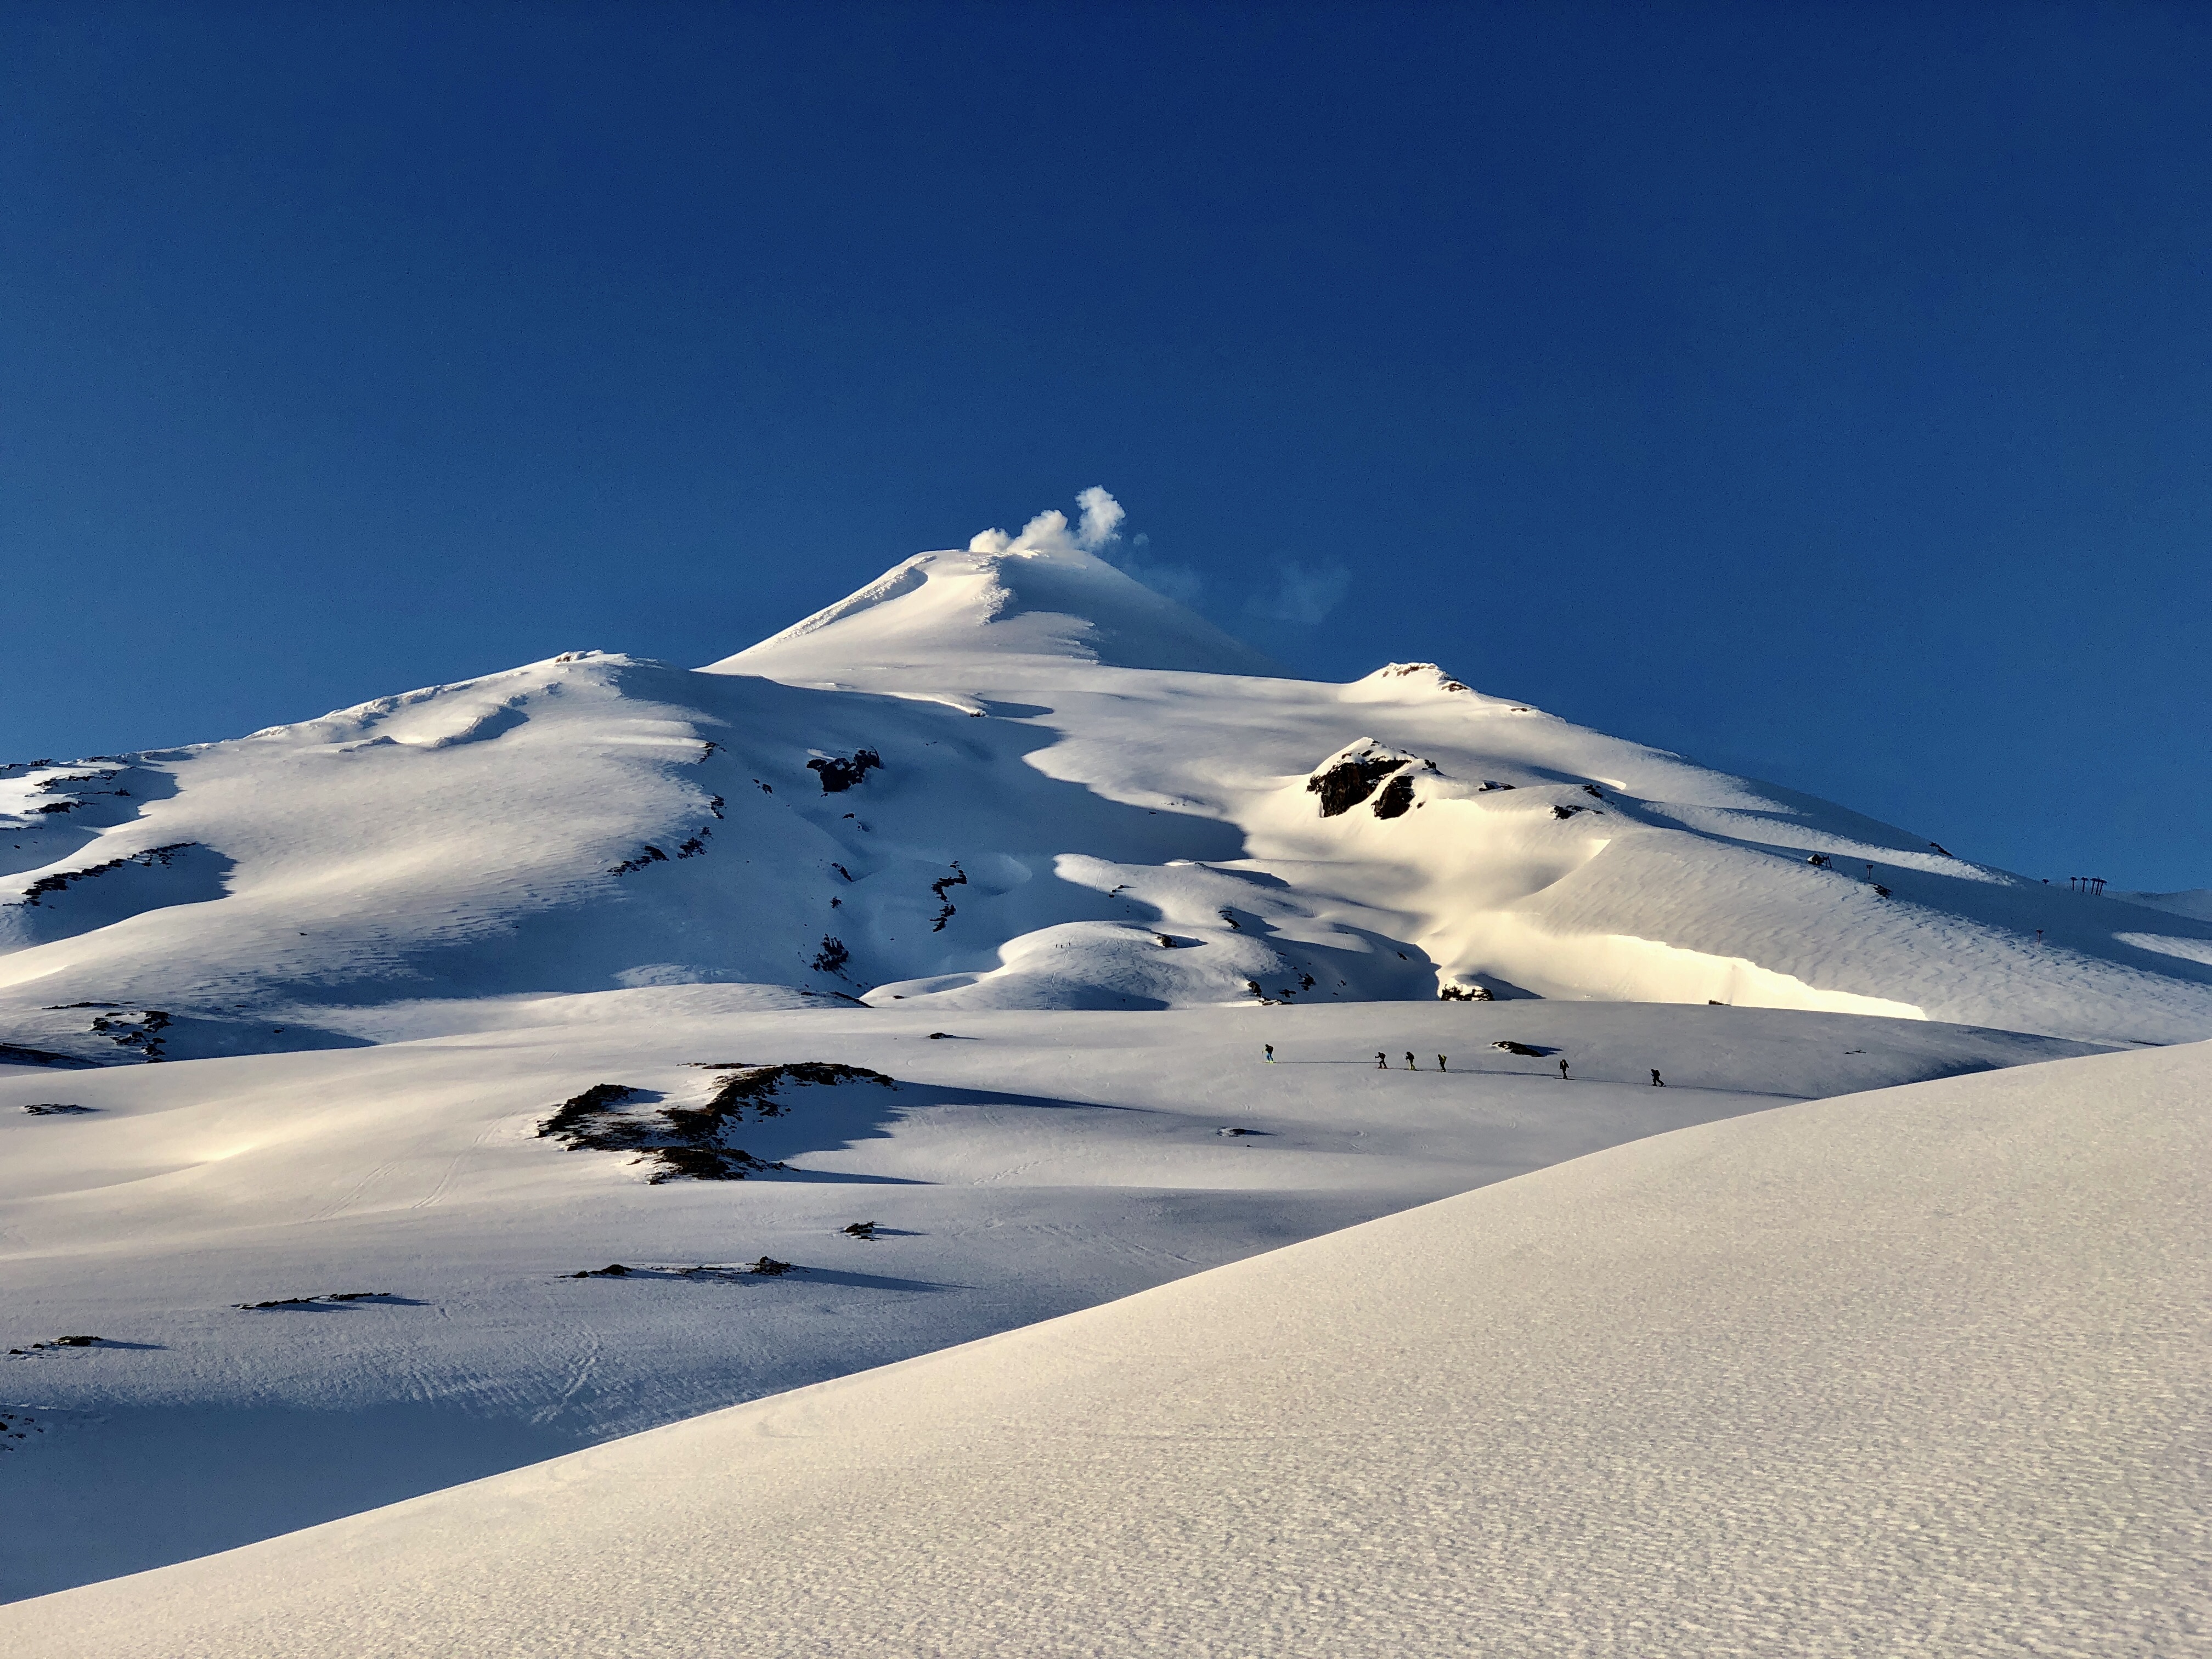 Skiing Volcanoes in Chile